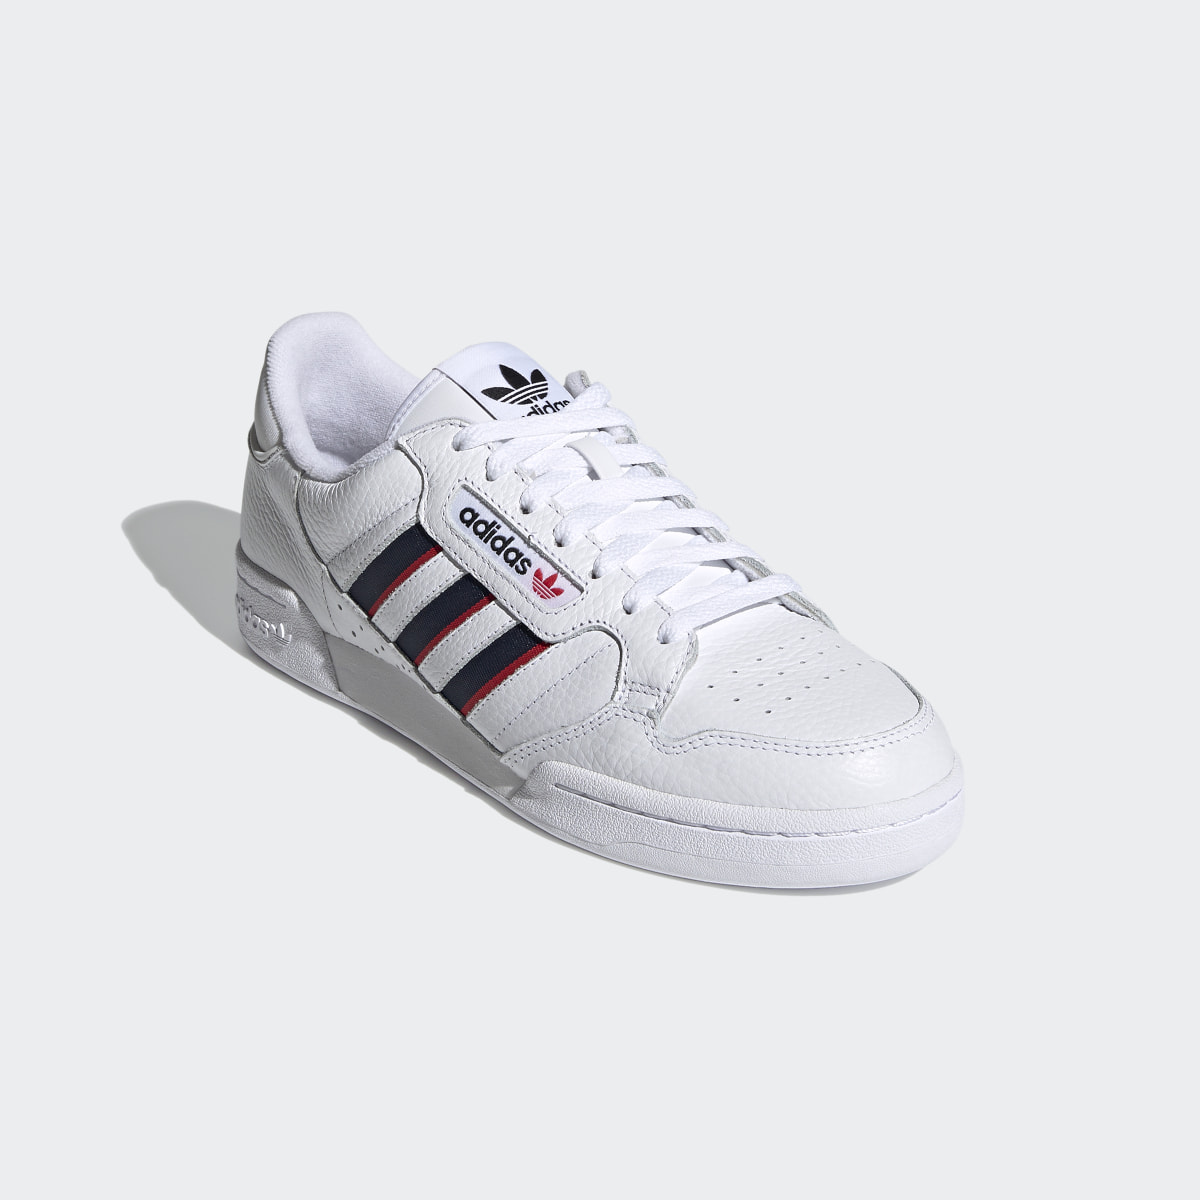 Adidas Continental 80 Stripes Shoes. 5